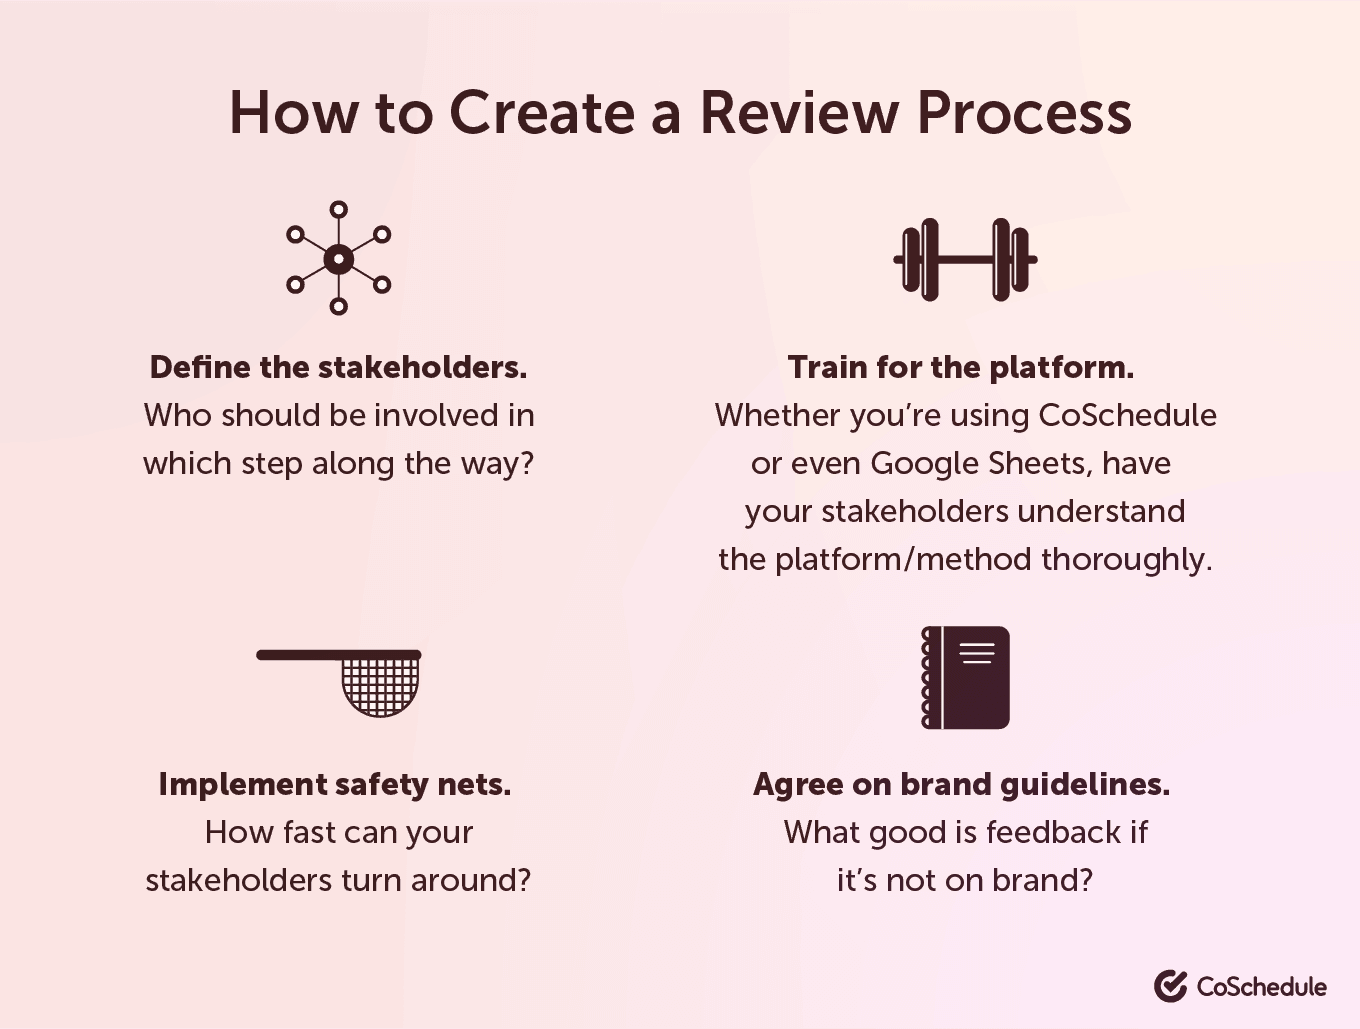 How to create a review process